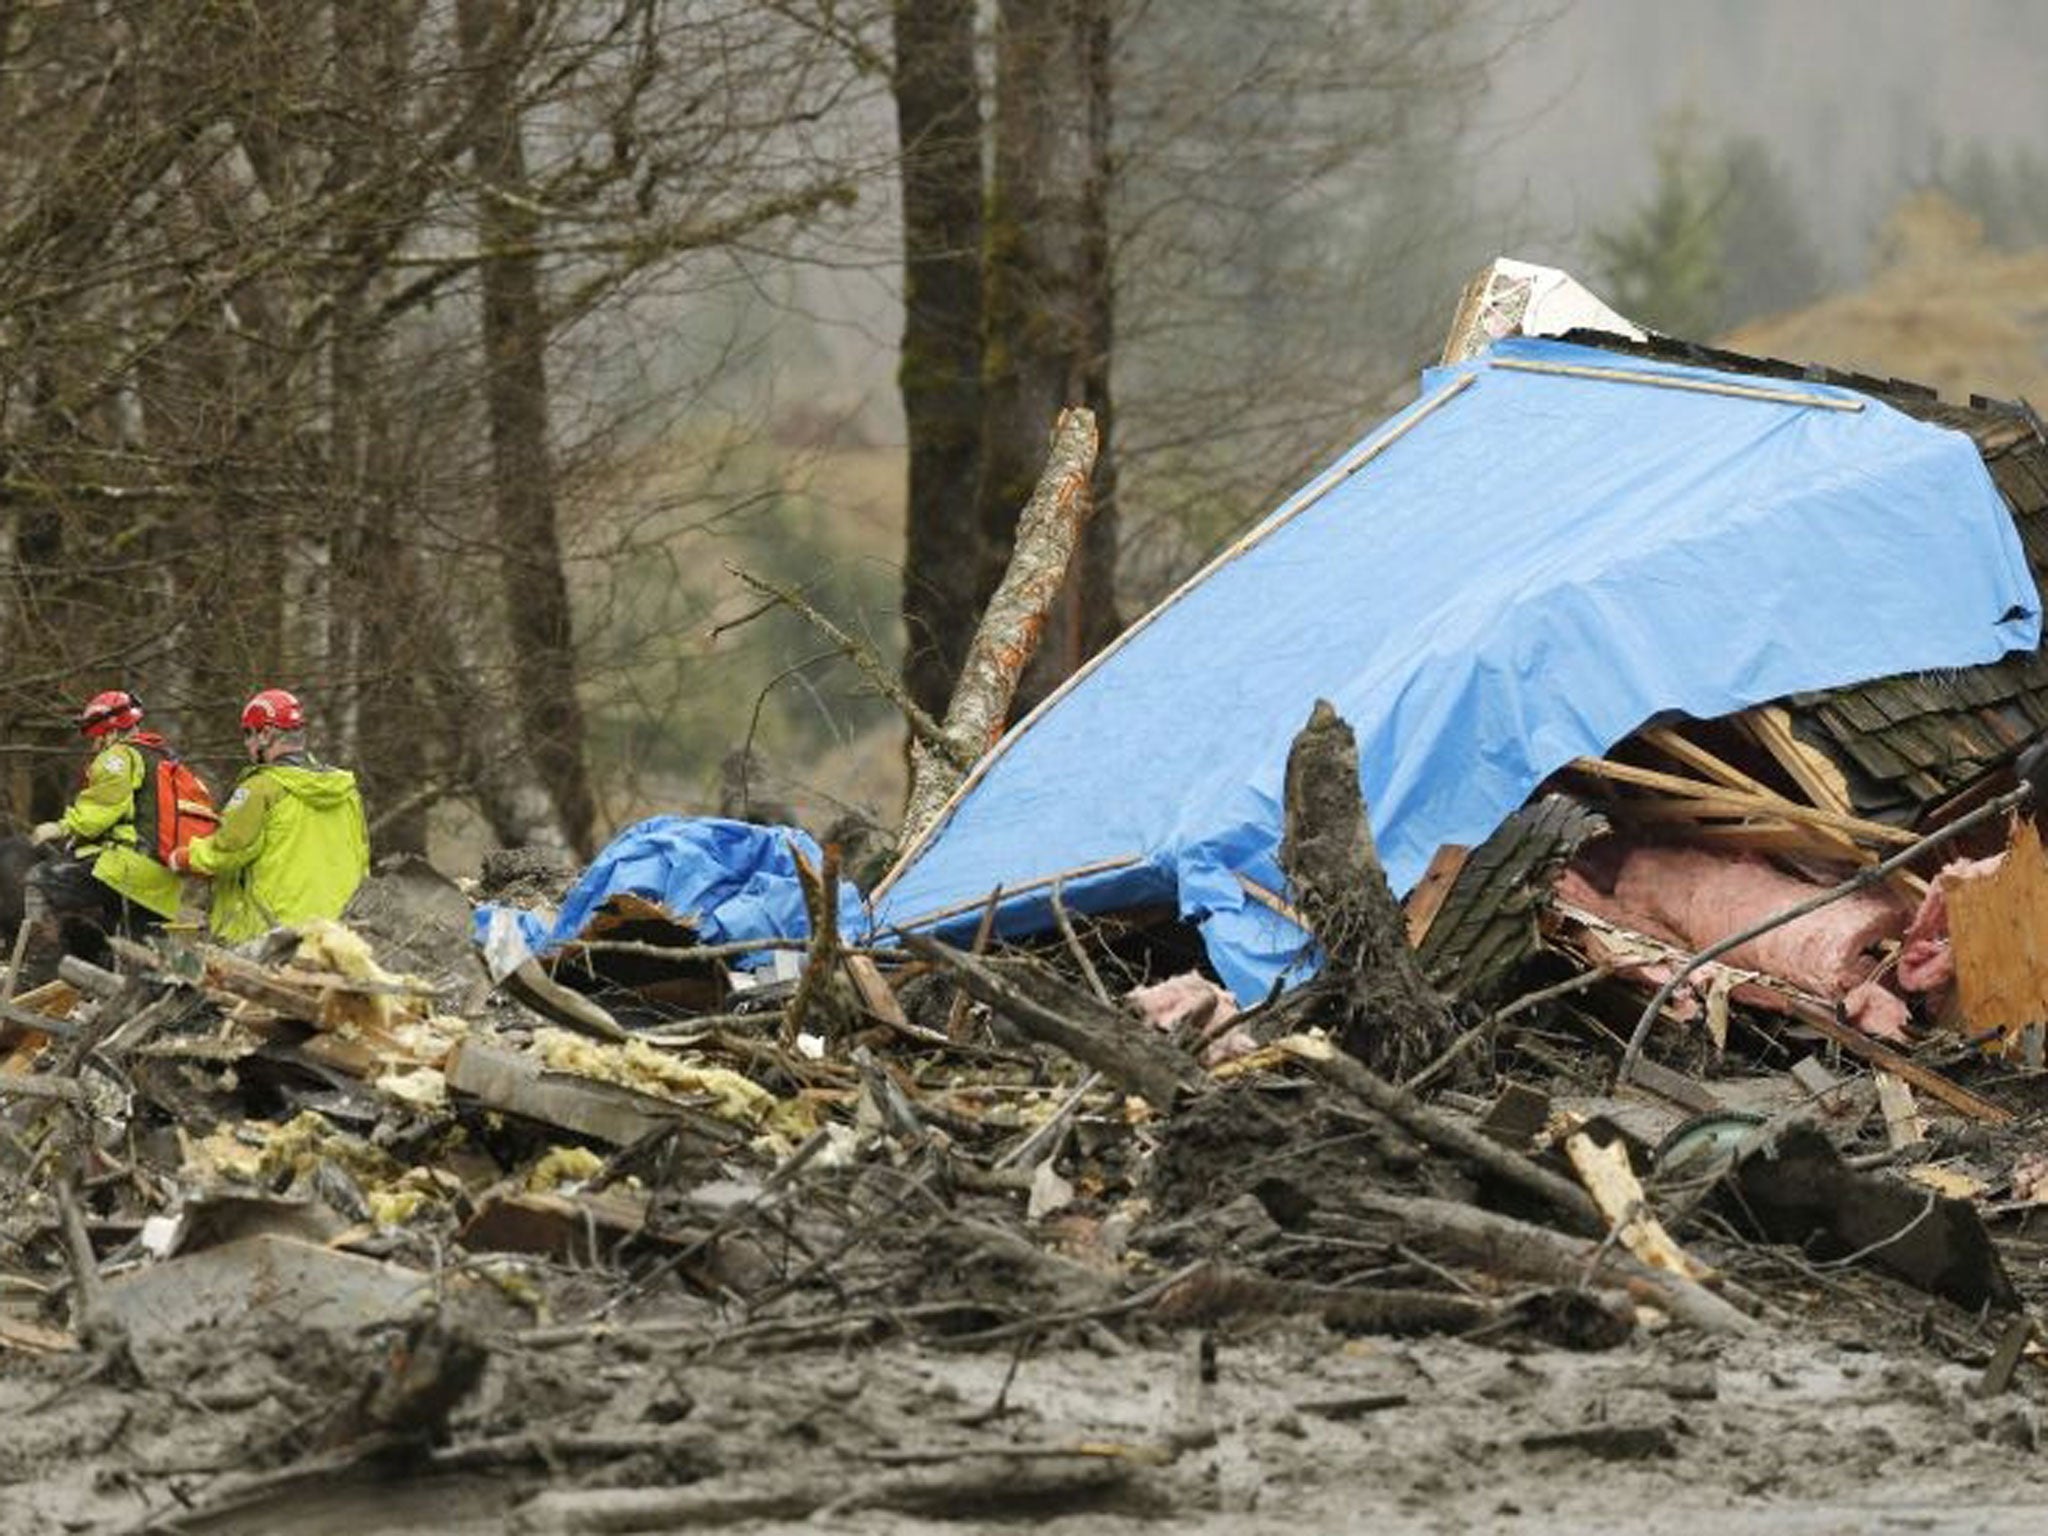 Workers look for victims in the mudslide near Oso, Washington on 25 March.